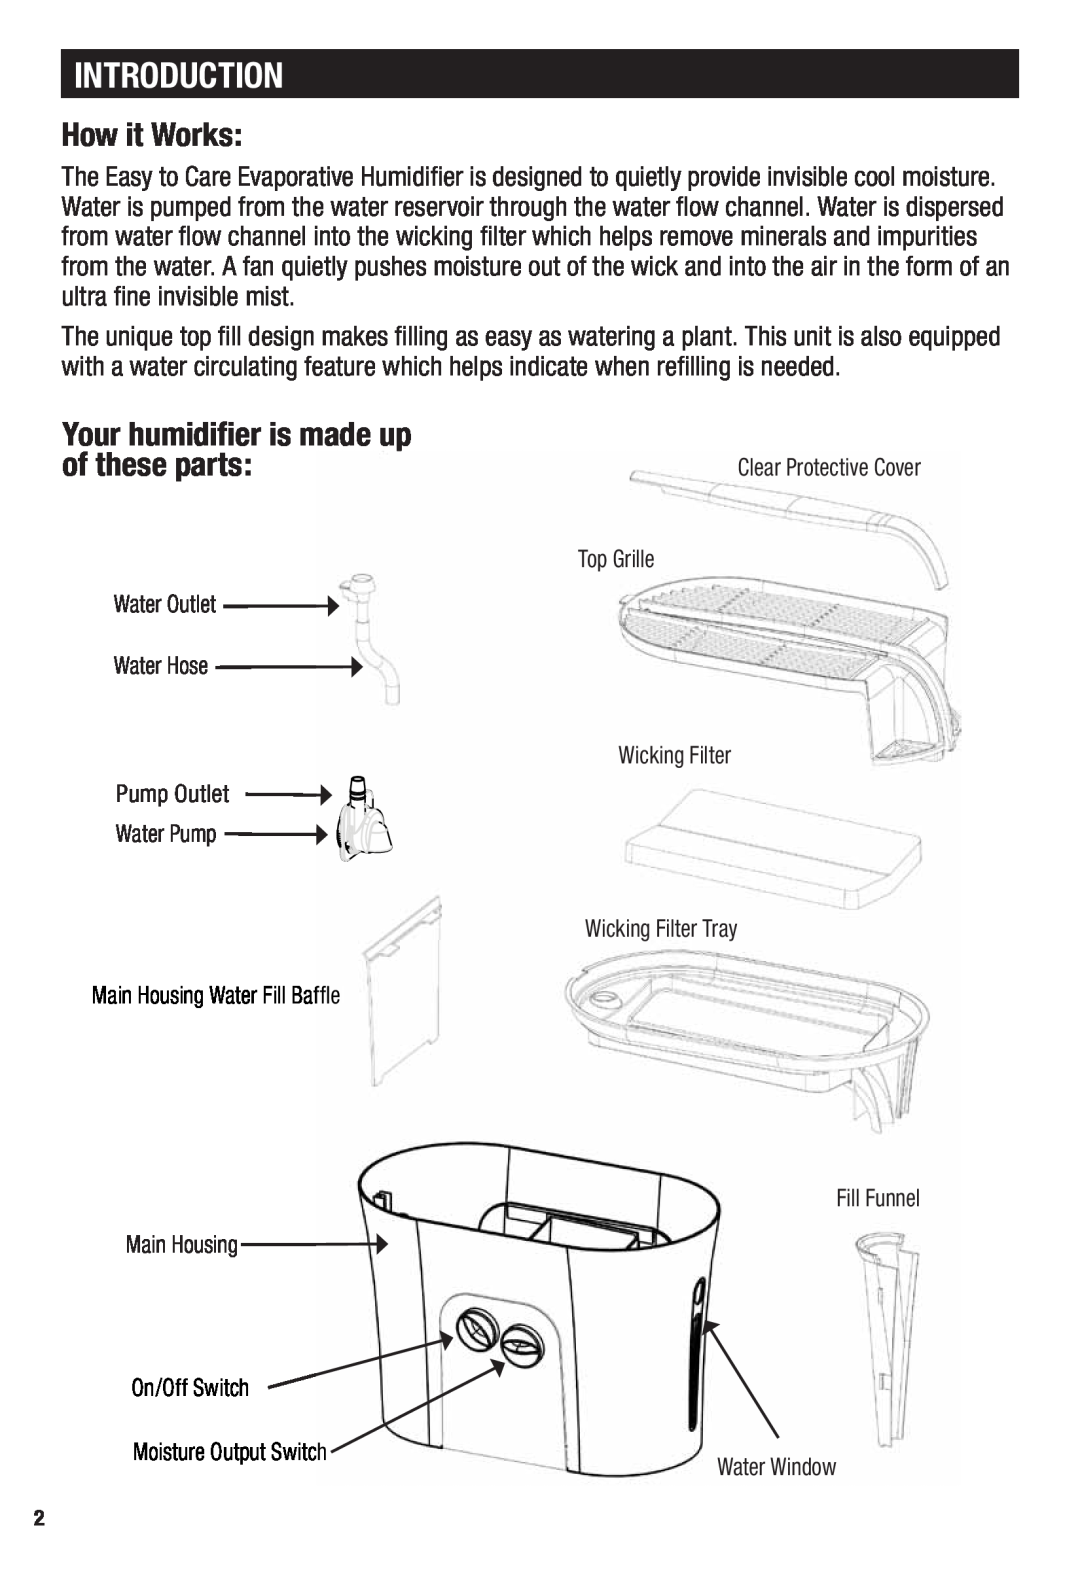 Honeywell HCM-750 important safety instructions Introduction, How it Works, Your humidifier is made up of these parts 